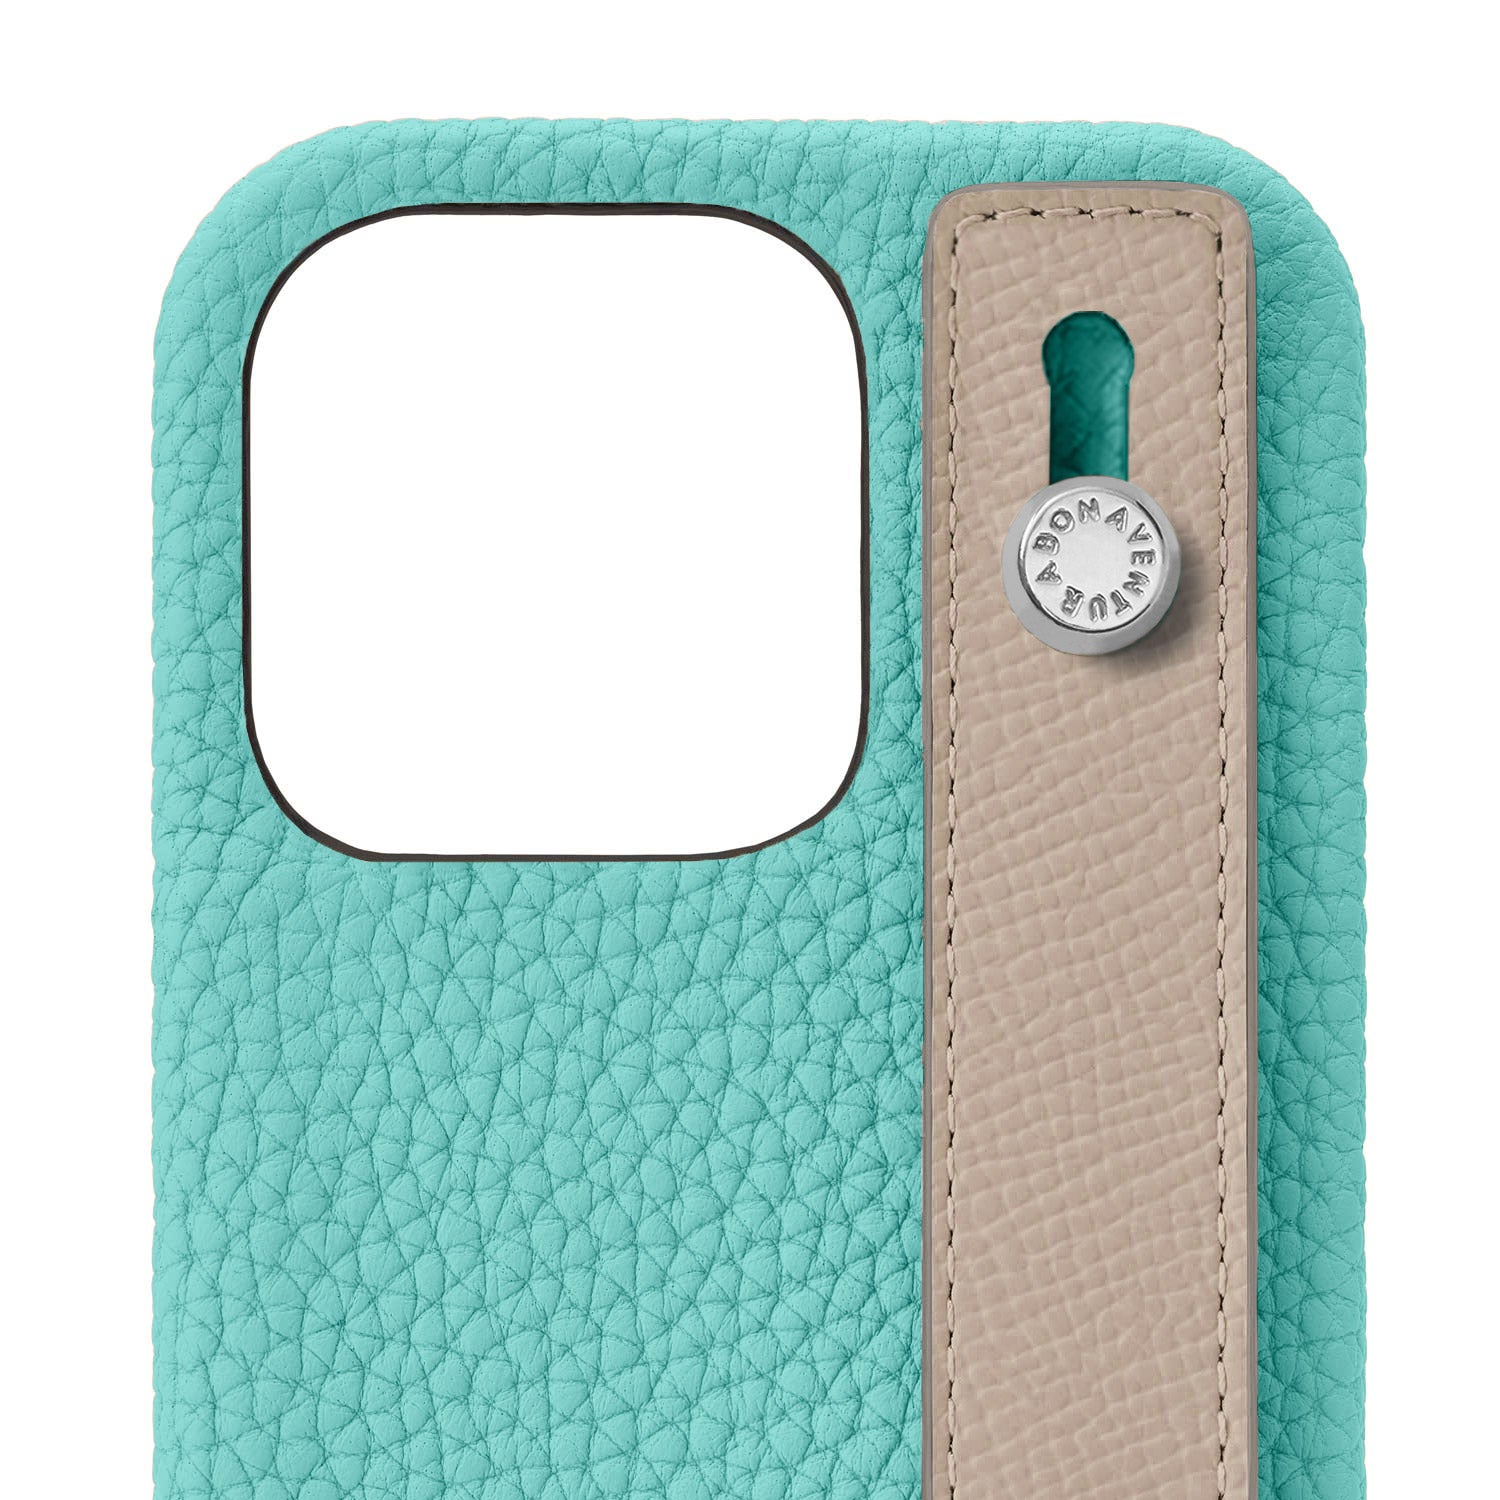 (iPhone 13 Pro) Back cover case with handle, shrink leather